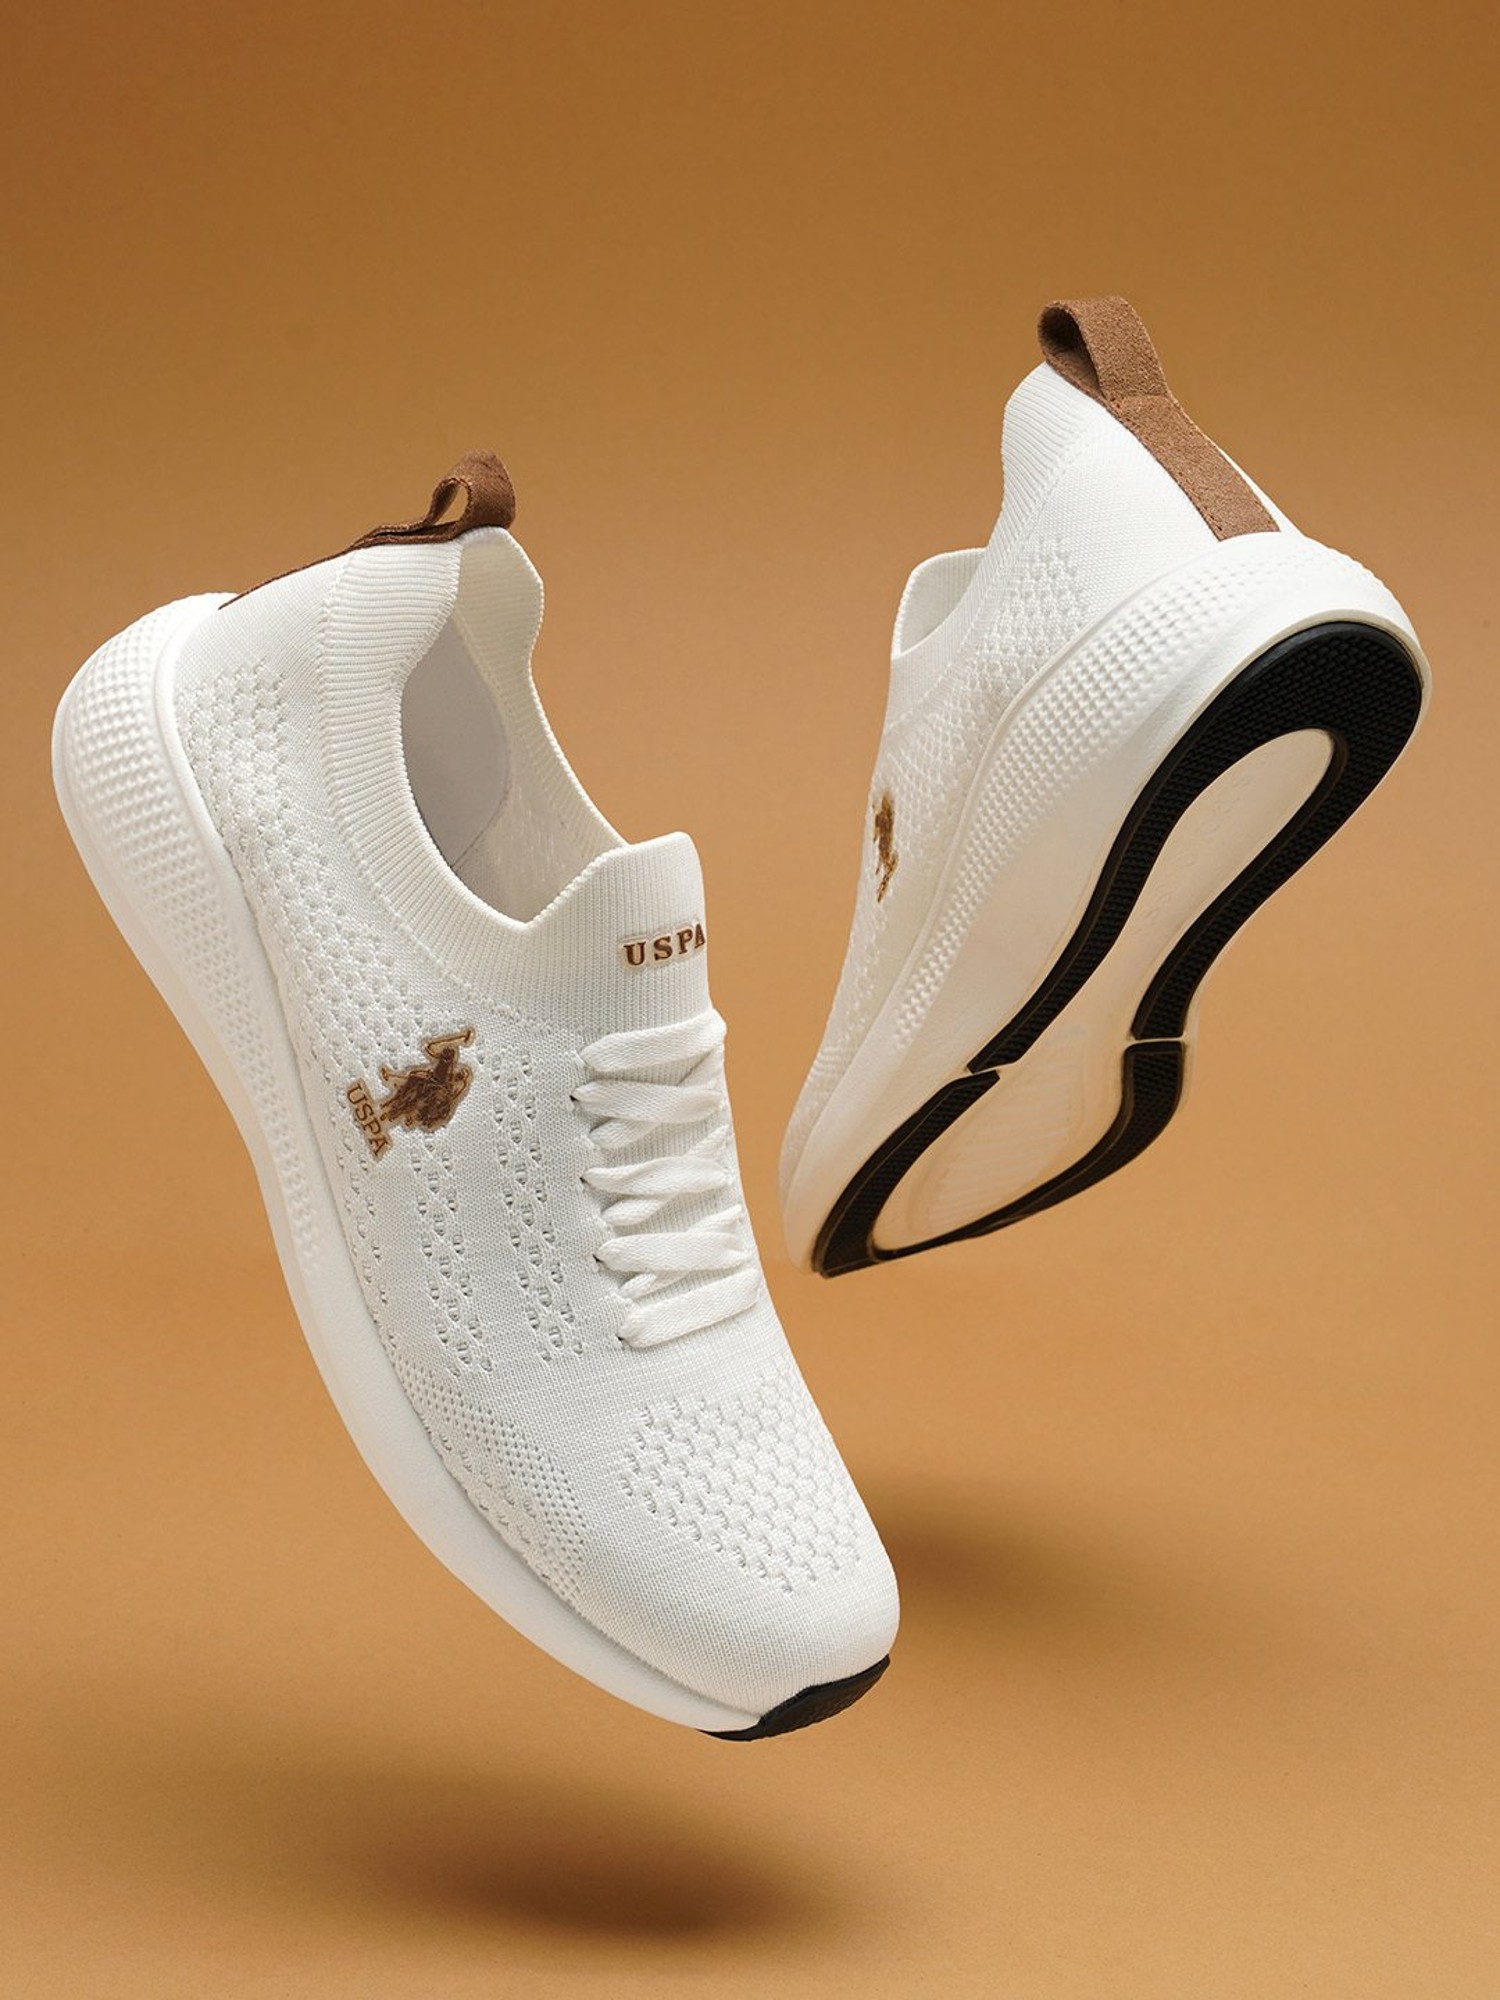 Details more than 252 mens white sneakers cheap